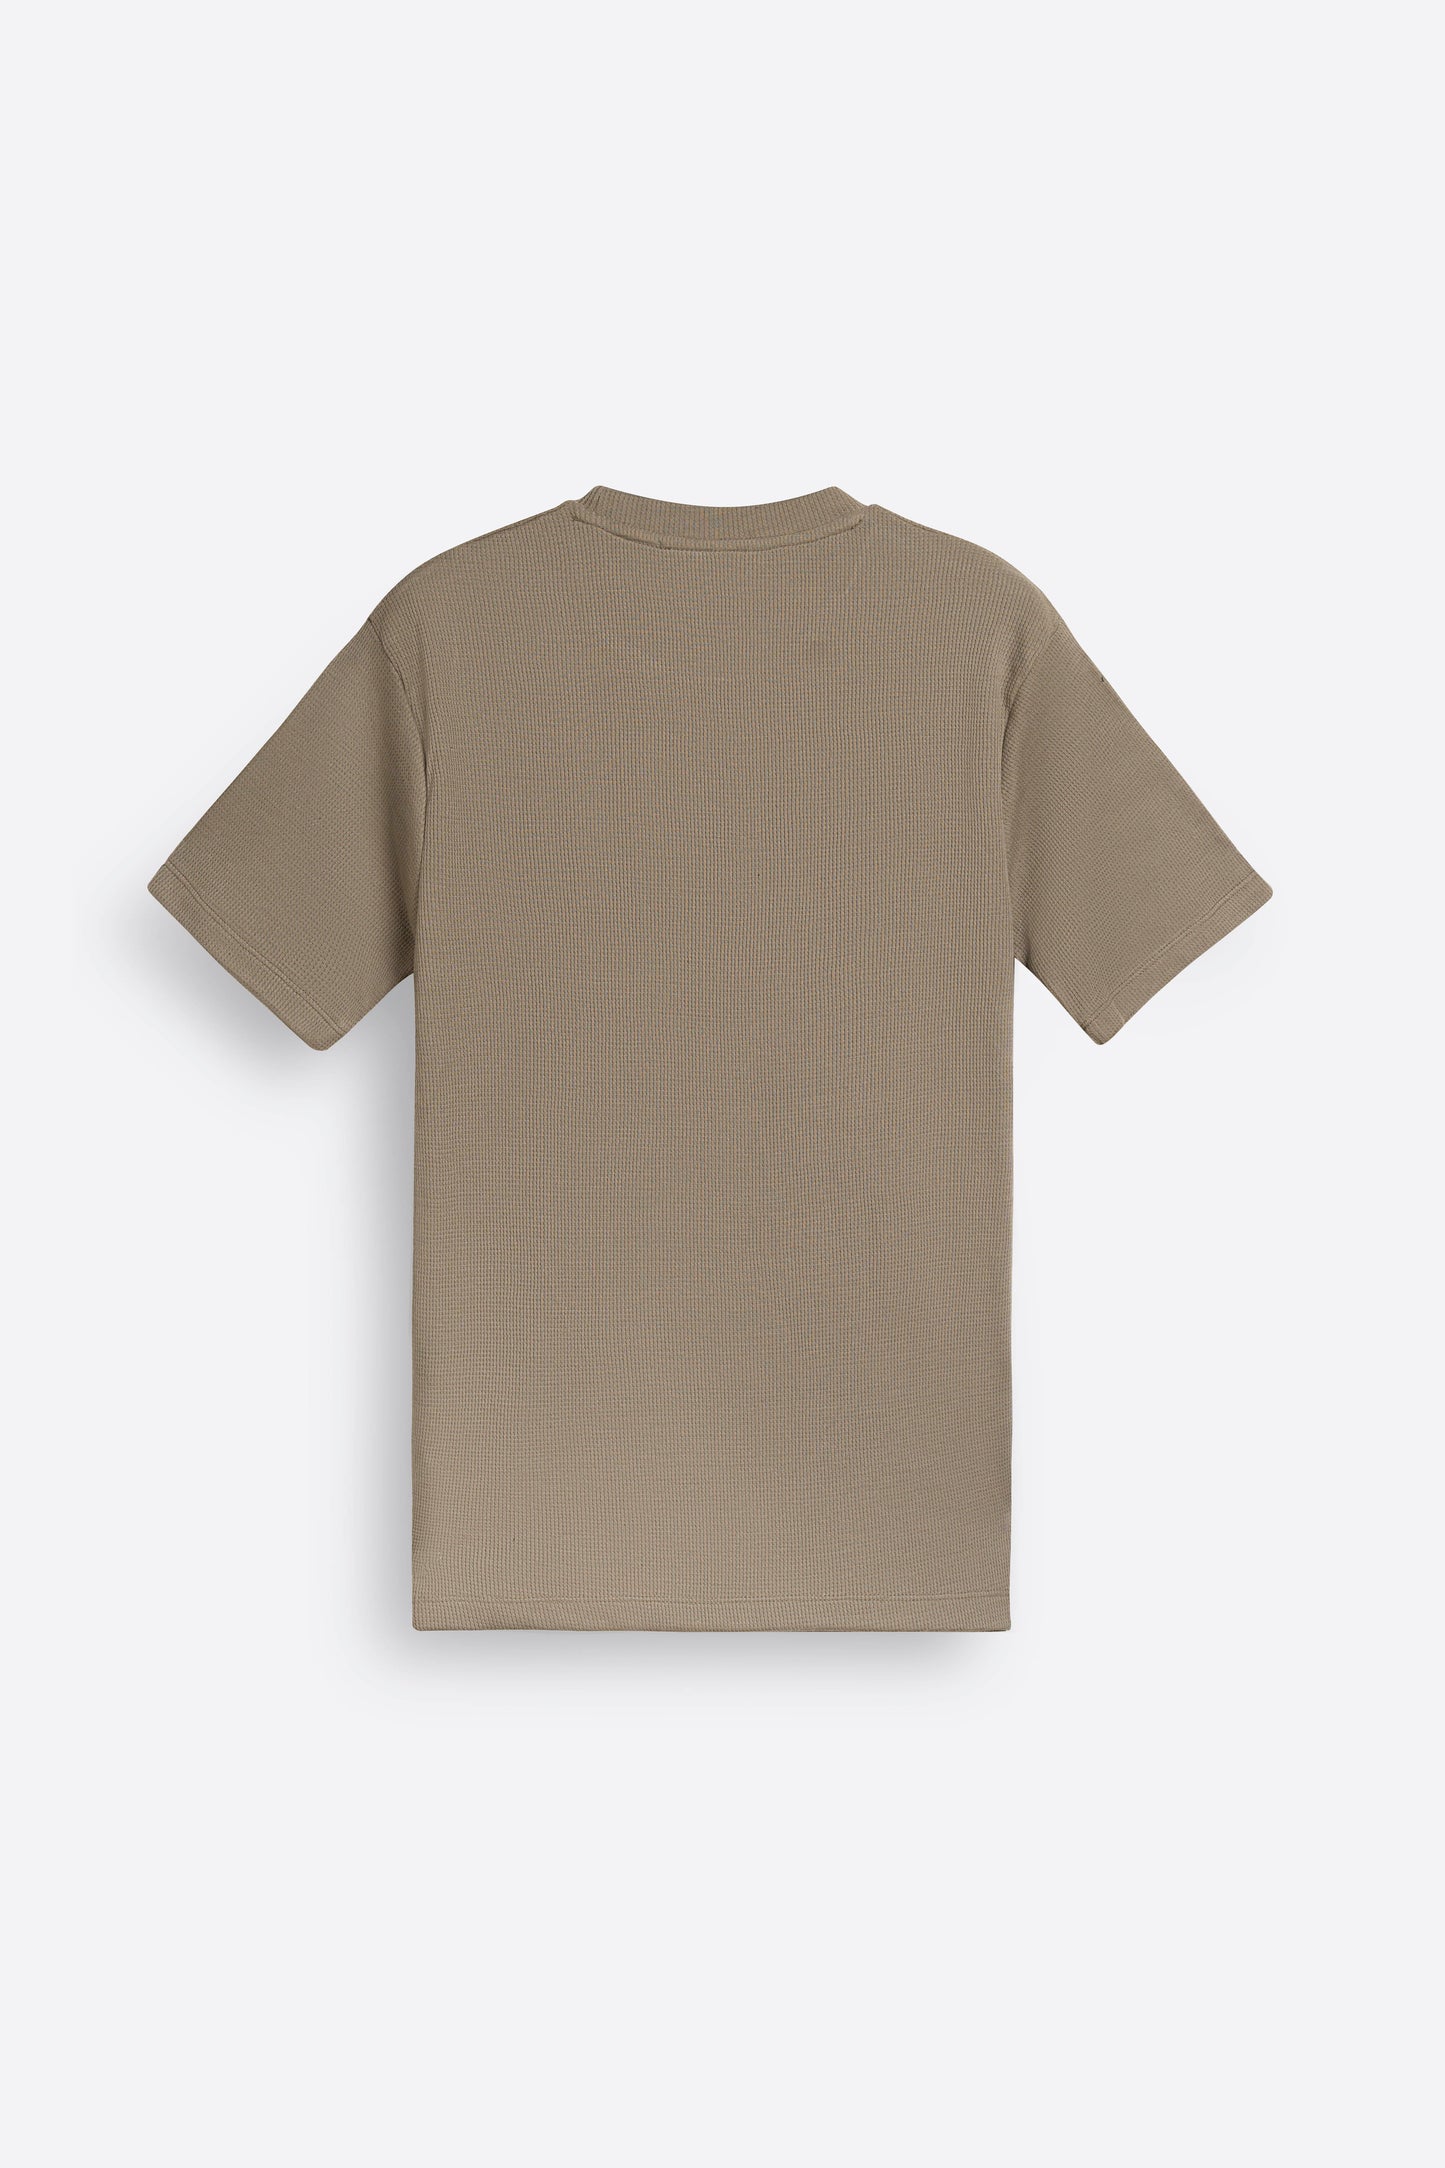 Textured-Knit T-shirt in Sand